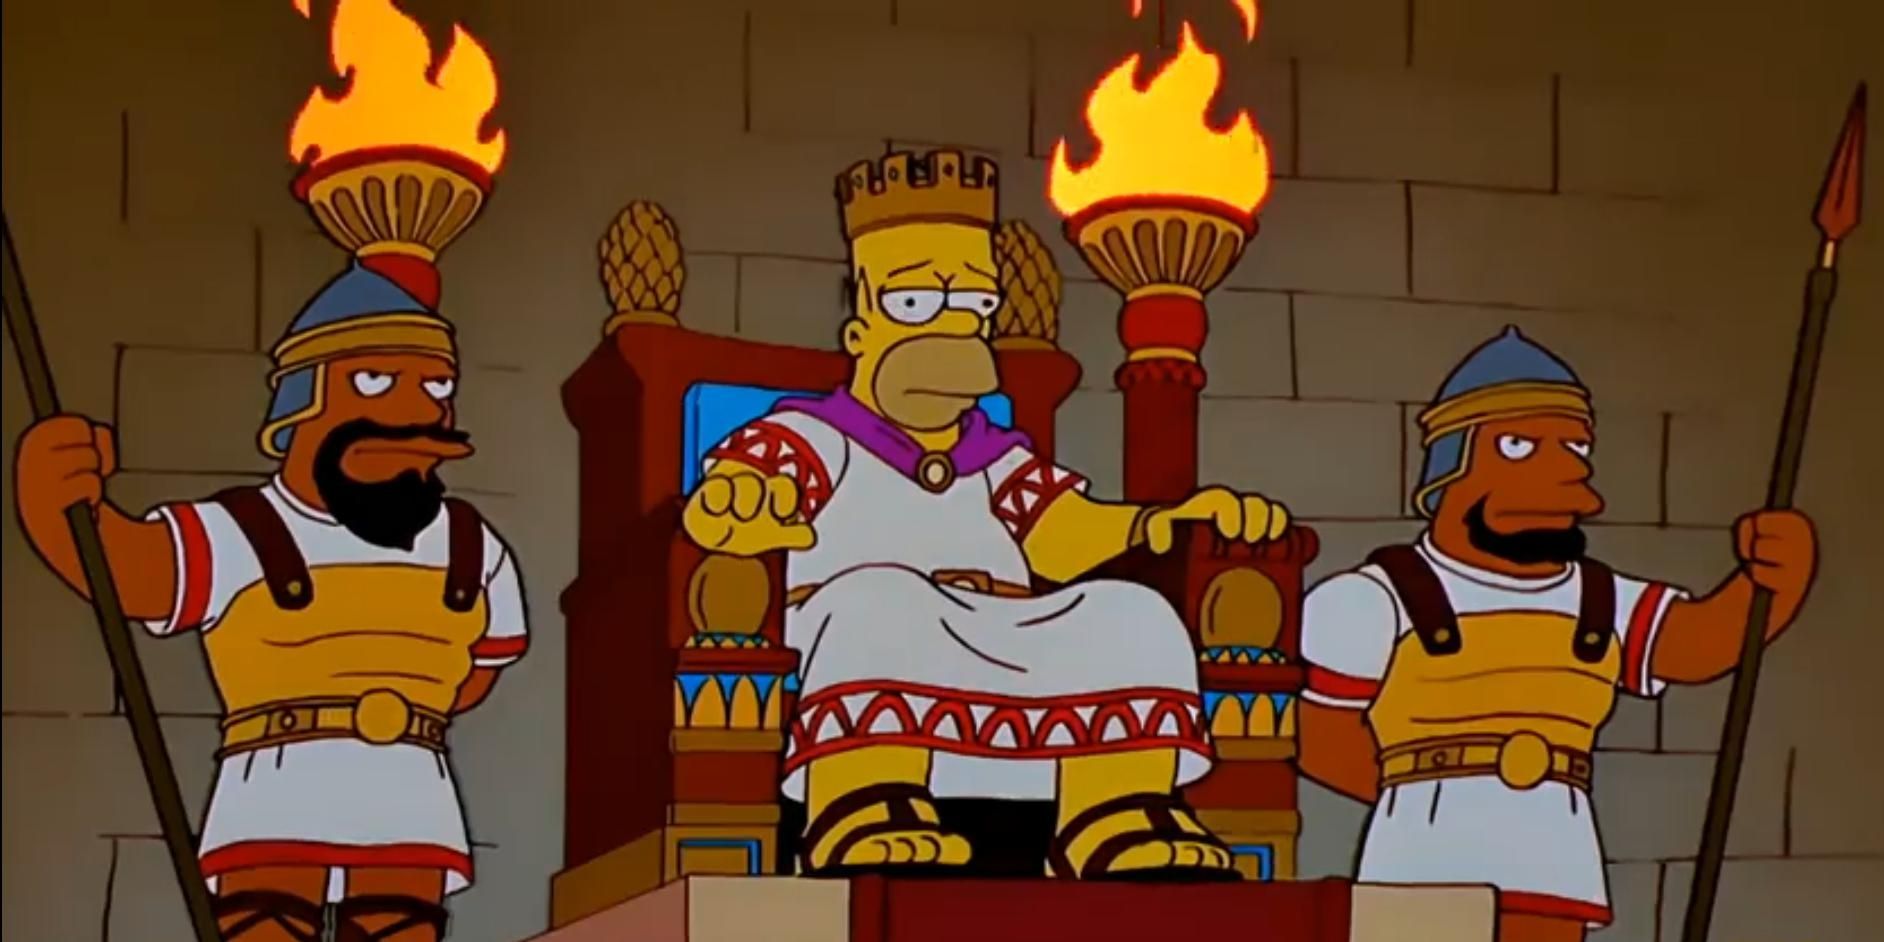 The Simpsons 10 Best Anthology Episodes Ranked